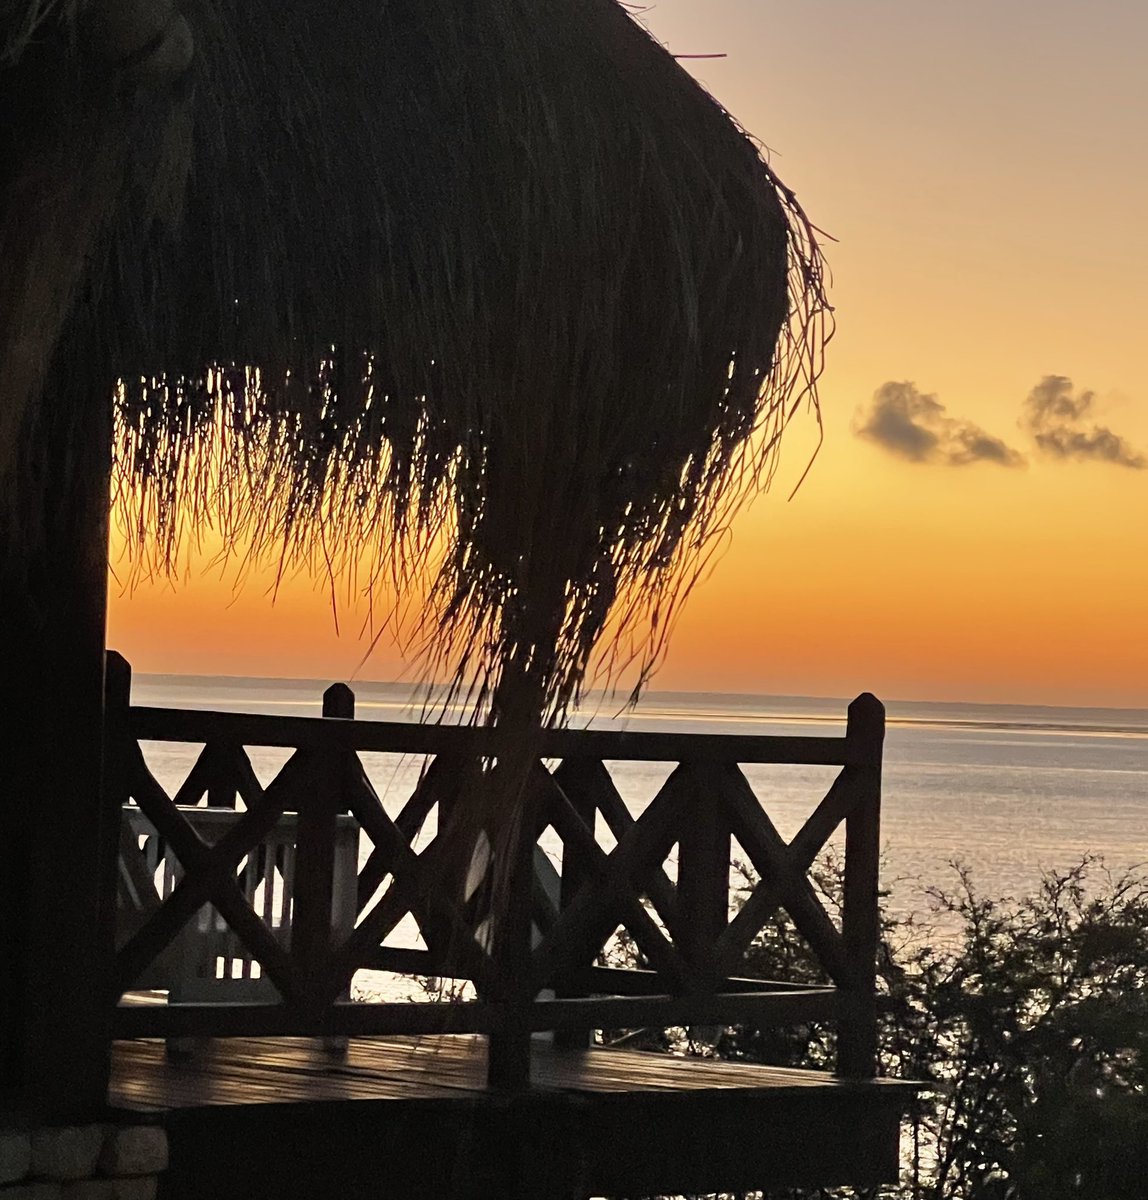 Sunsets on the water
#private #lodge #seaview #ocean #beachproperty #privatebeach #holidayrental #beautifulnature #naturevacation #exclusive #groups #families #natureenthusiasts #wateractivities #barefootluxury #discover #africa  #travel #remote  #travelbloggers #airlink